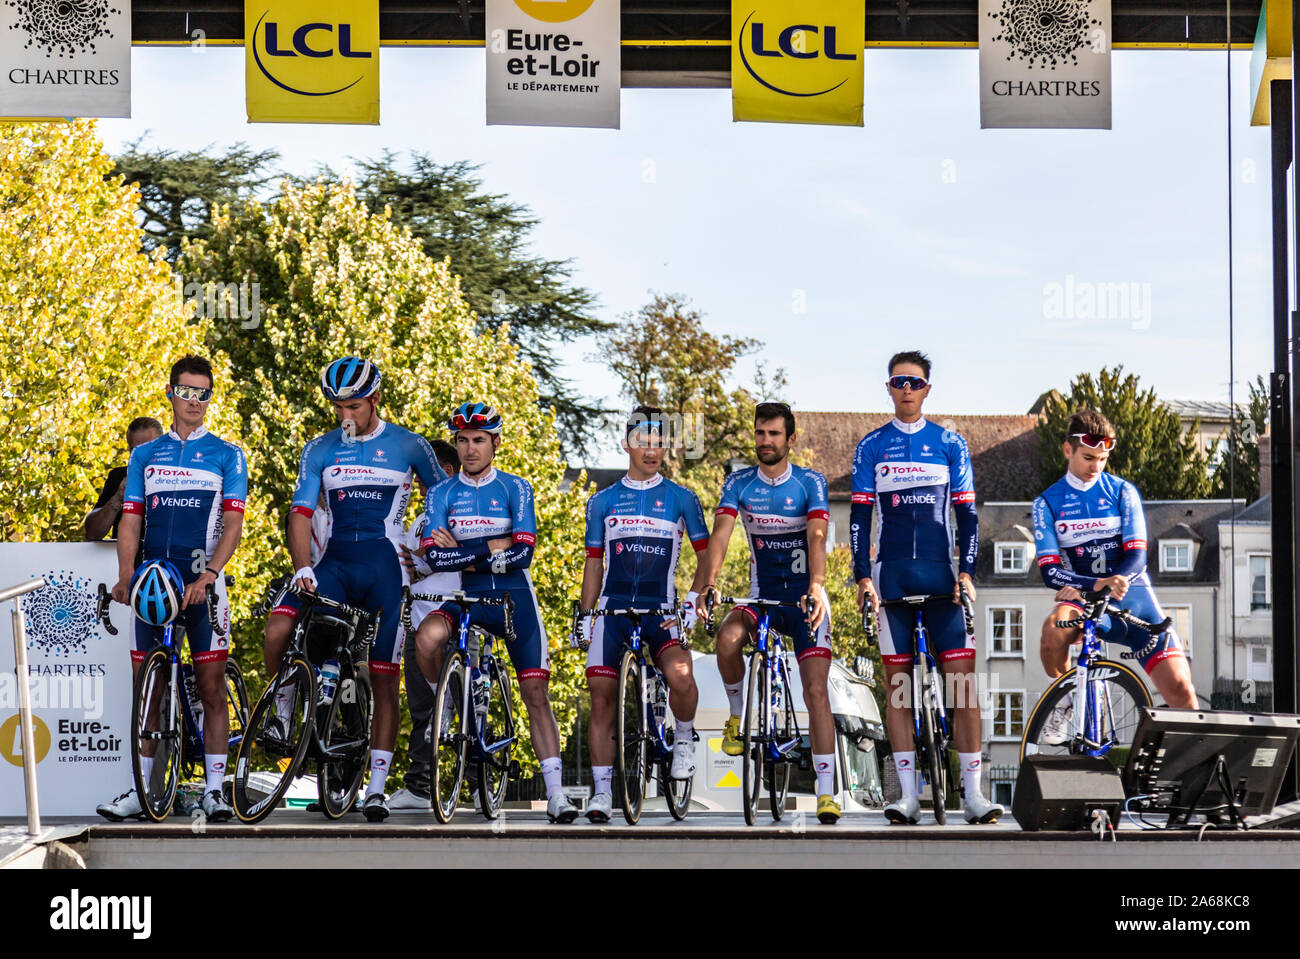 Chartres, France - October 13, 2019: Team Total Direct Energie is on the  podium in Chartres, during the teams presentation before the autumn French  cycling race Paris-Tours 2019 Stock Photo - Alamy